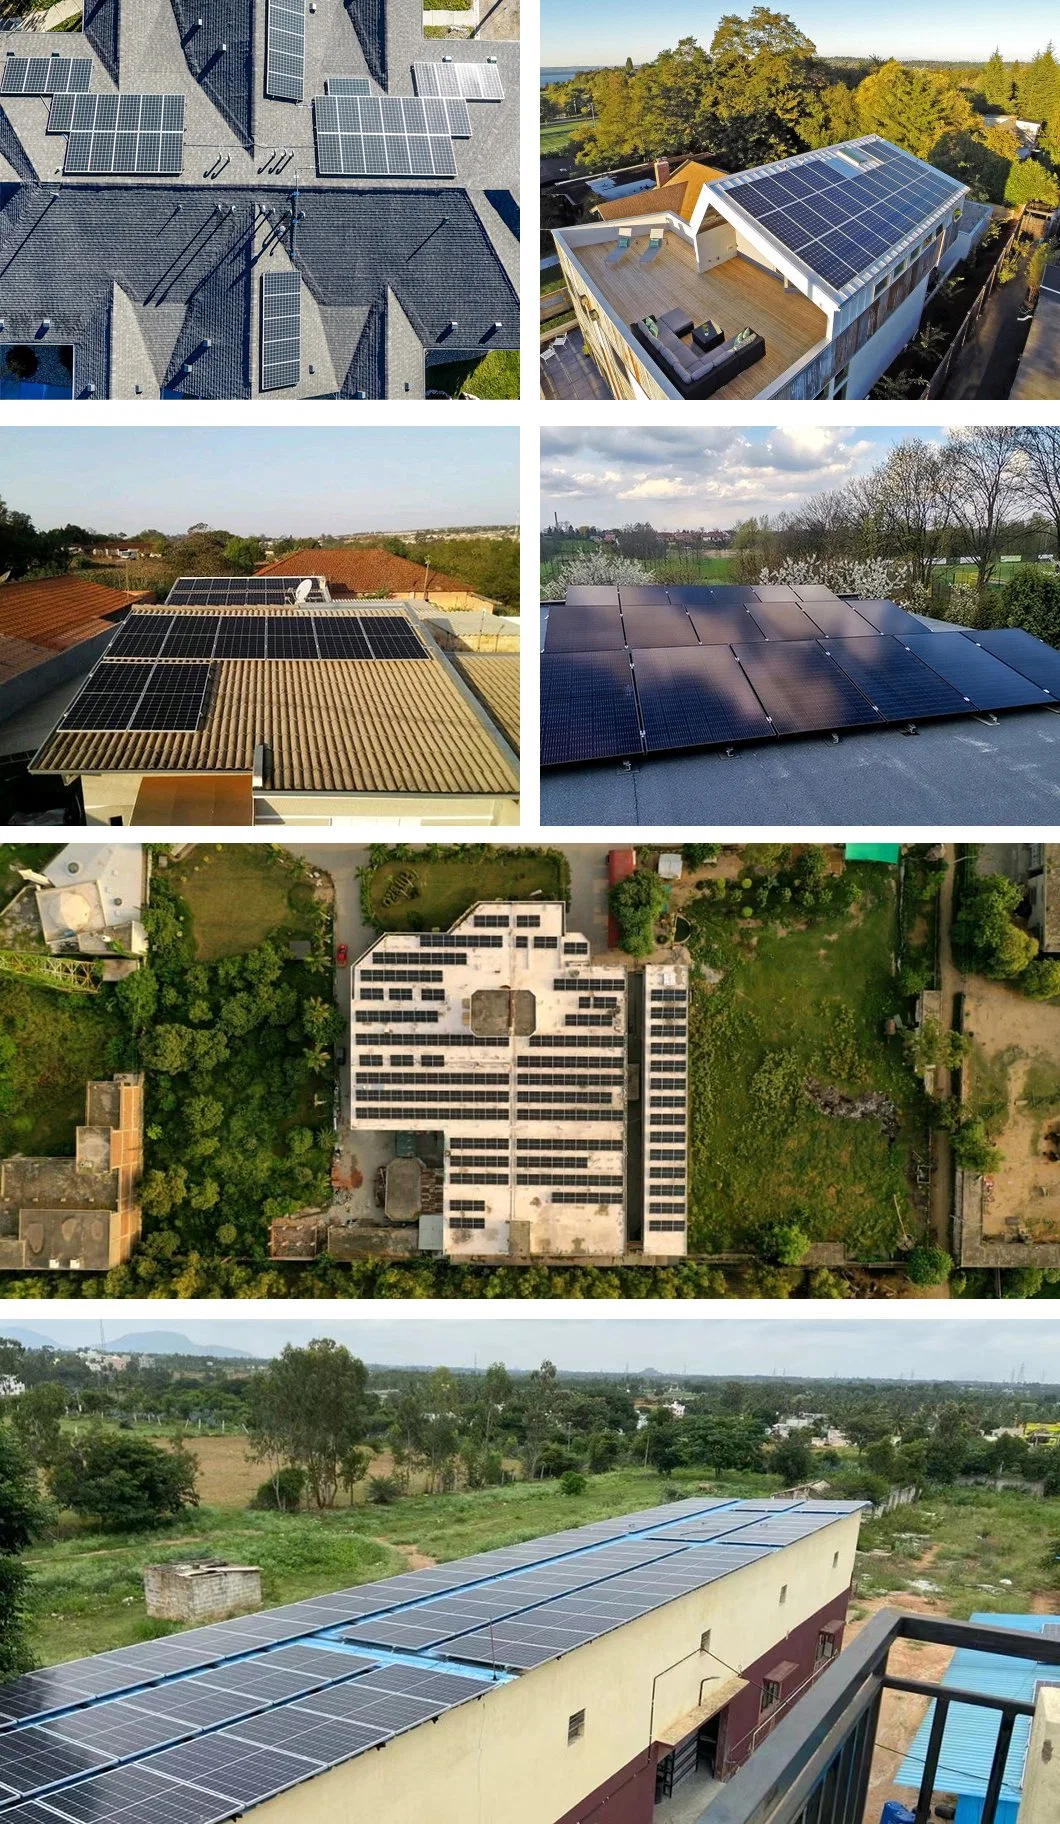 7kw 8kw 10kw DIY on Grid Solar Panels System Price One Stop Complete Solar Power Kits for Home